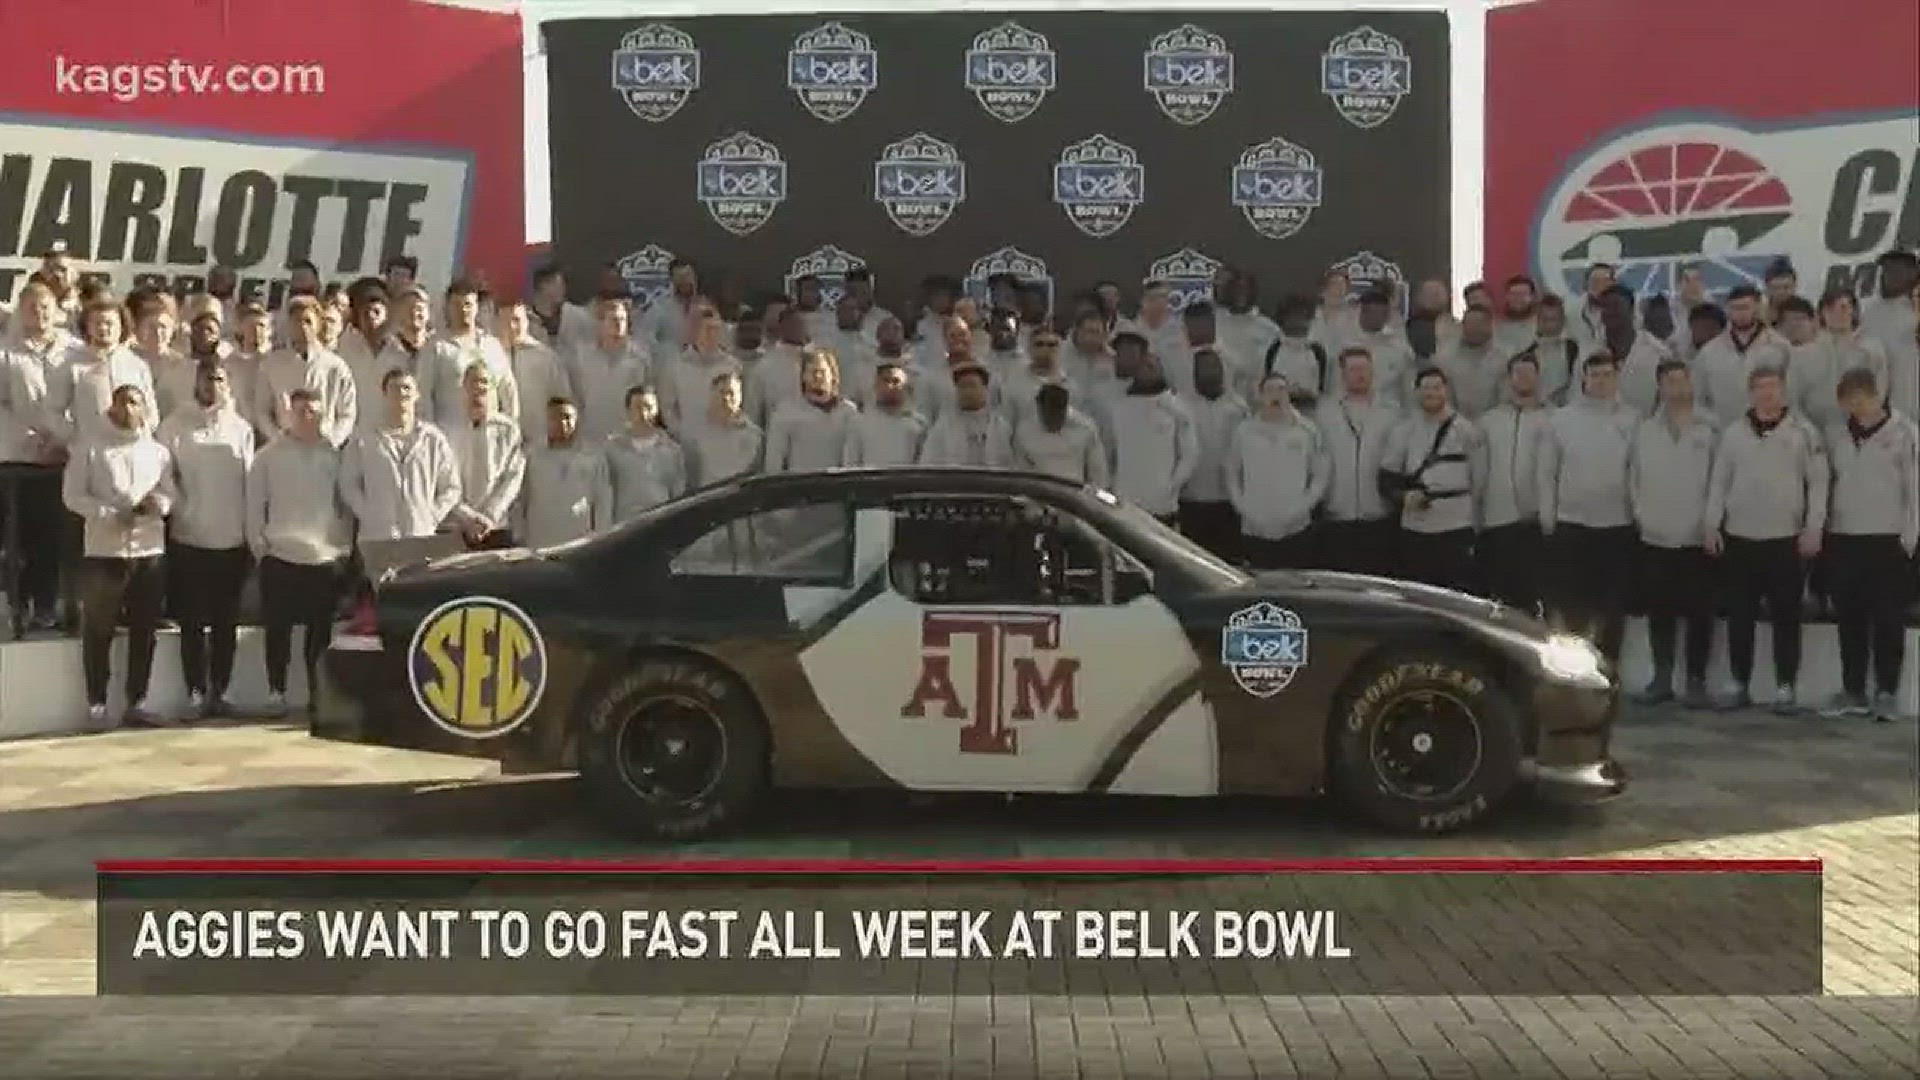 Texas A&M and Wake Forest kicked off Belk Bowl festivities on Tuesday with a few laps around Charlotte Motor Speedway.